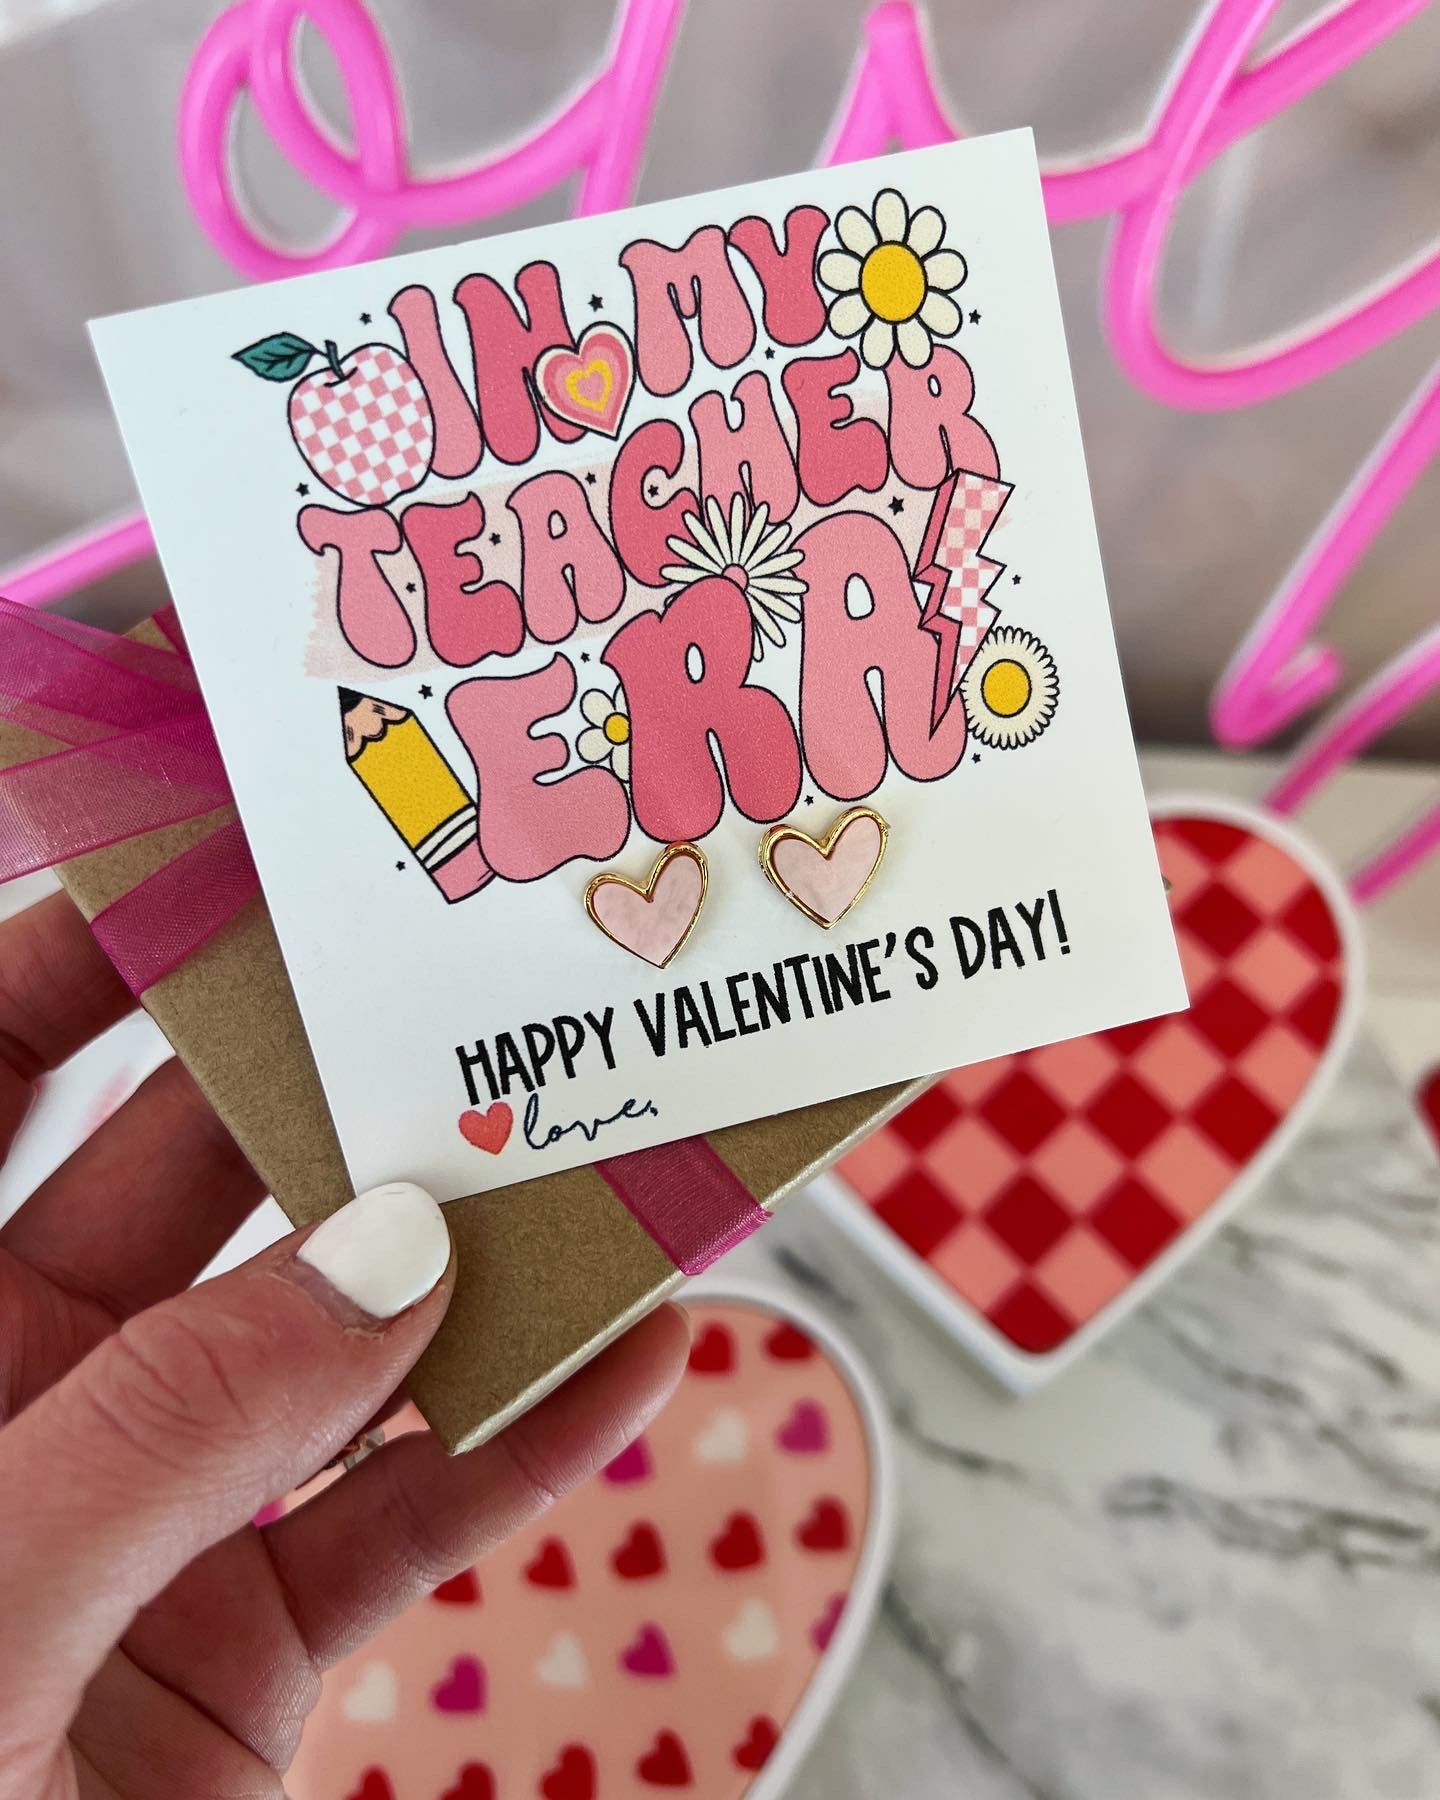 Teacher Valentine's Day Gift!Pink & Gold Heart Stud earrings, Valentine's gift, included with box+ribbon! Happy Valentine's Day!Teacher gift